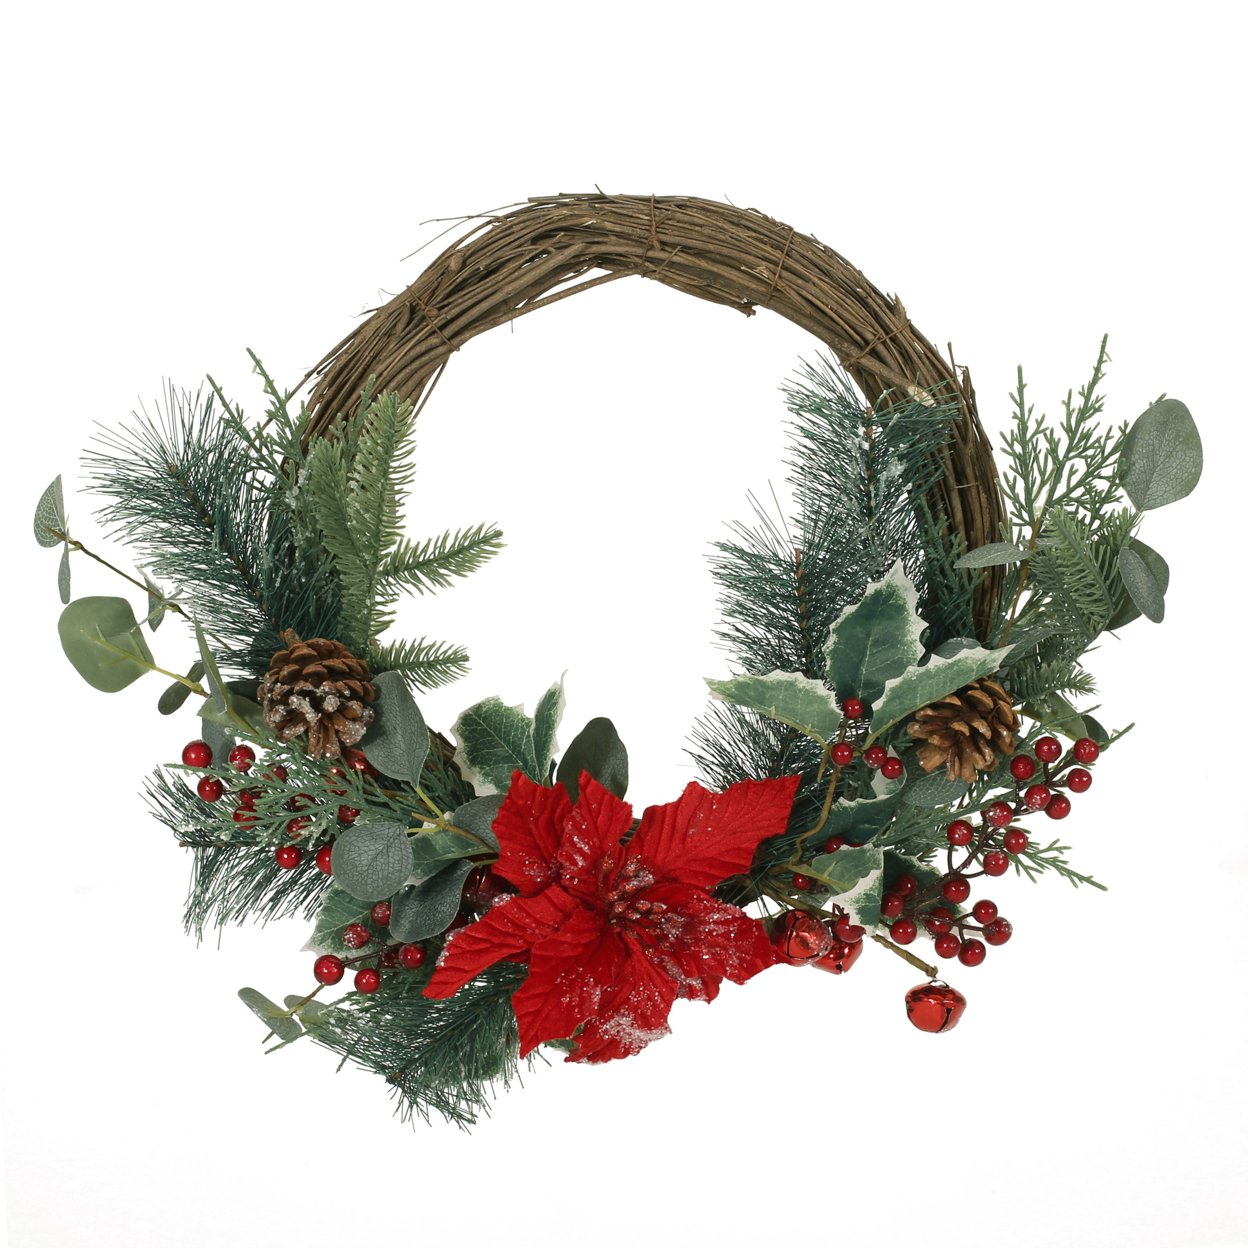 Potvin 23.5 Eucalyptus Artificial Half Wreath With Poinsettia And Berries, Green And Red